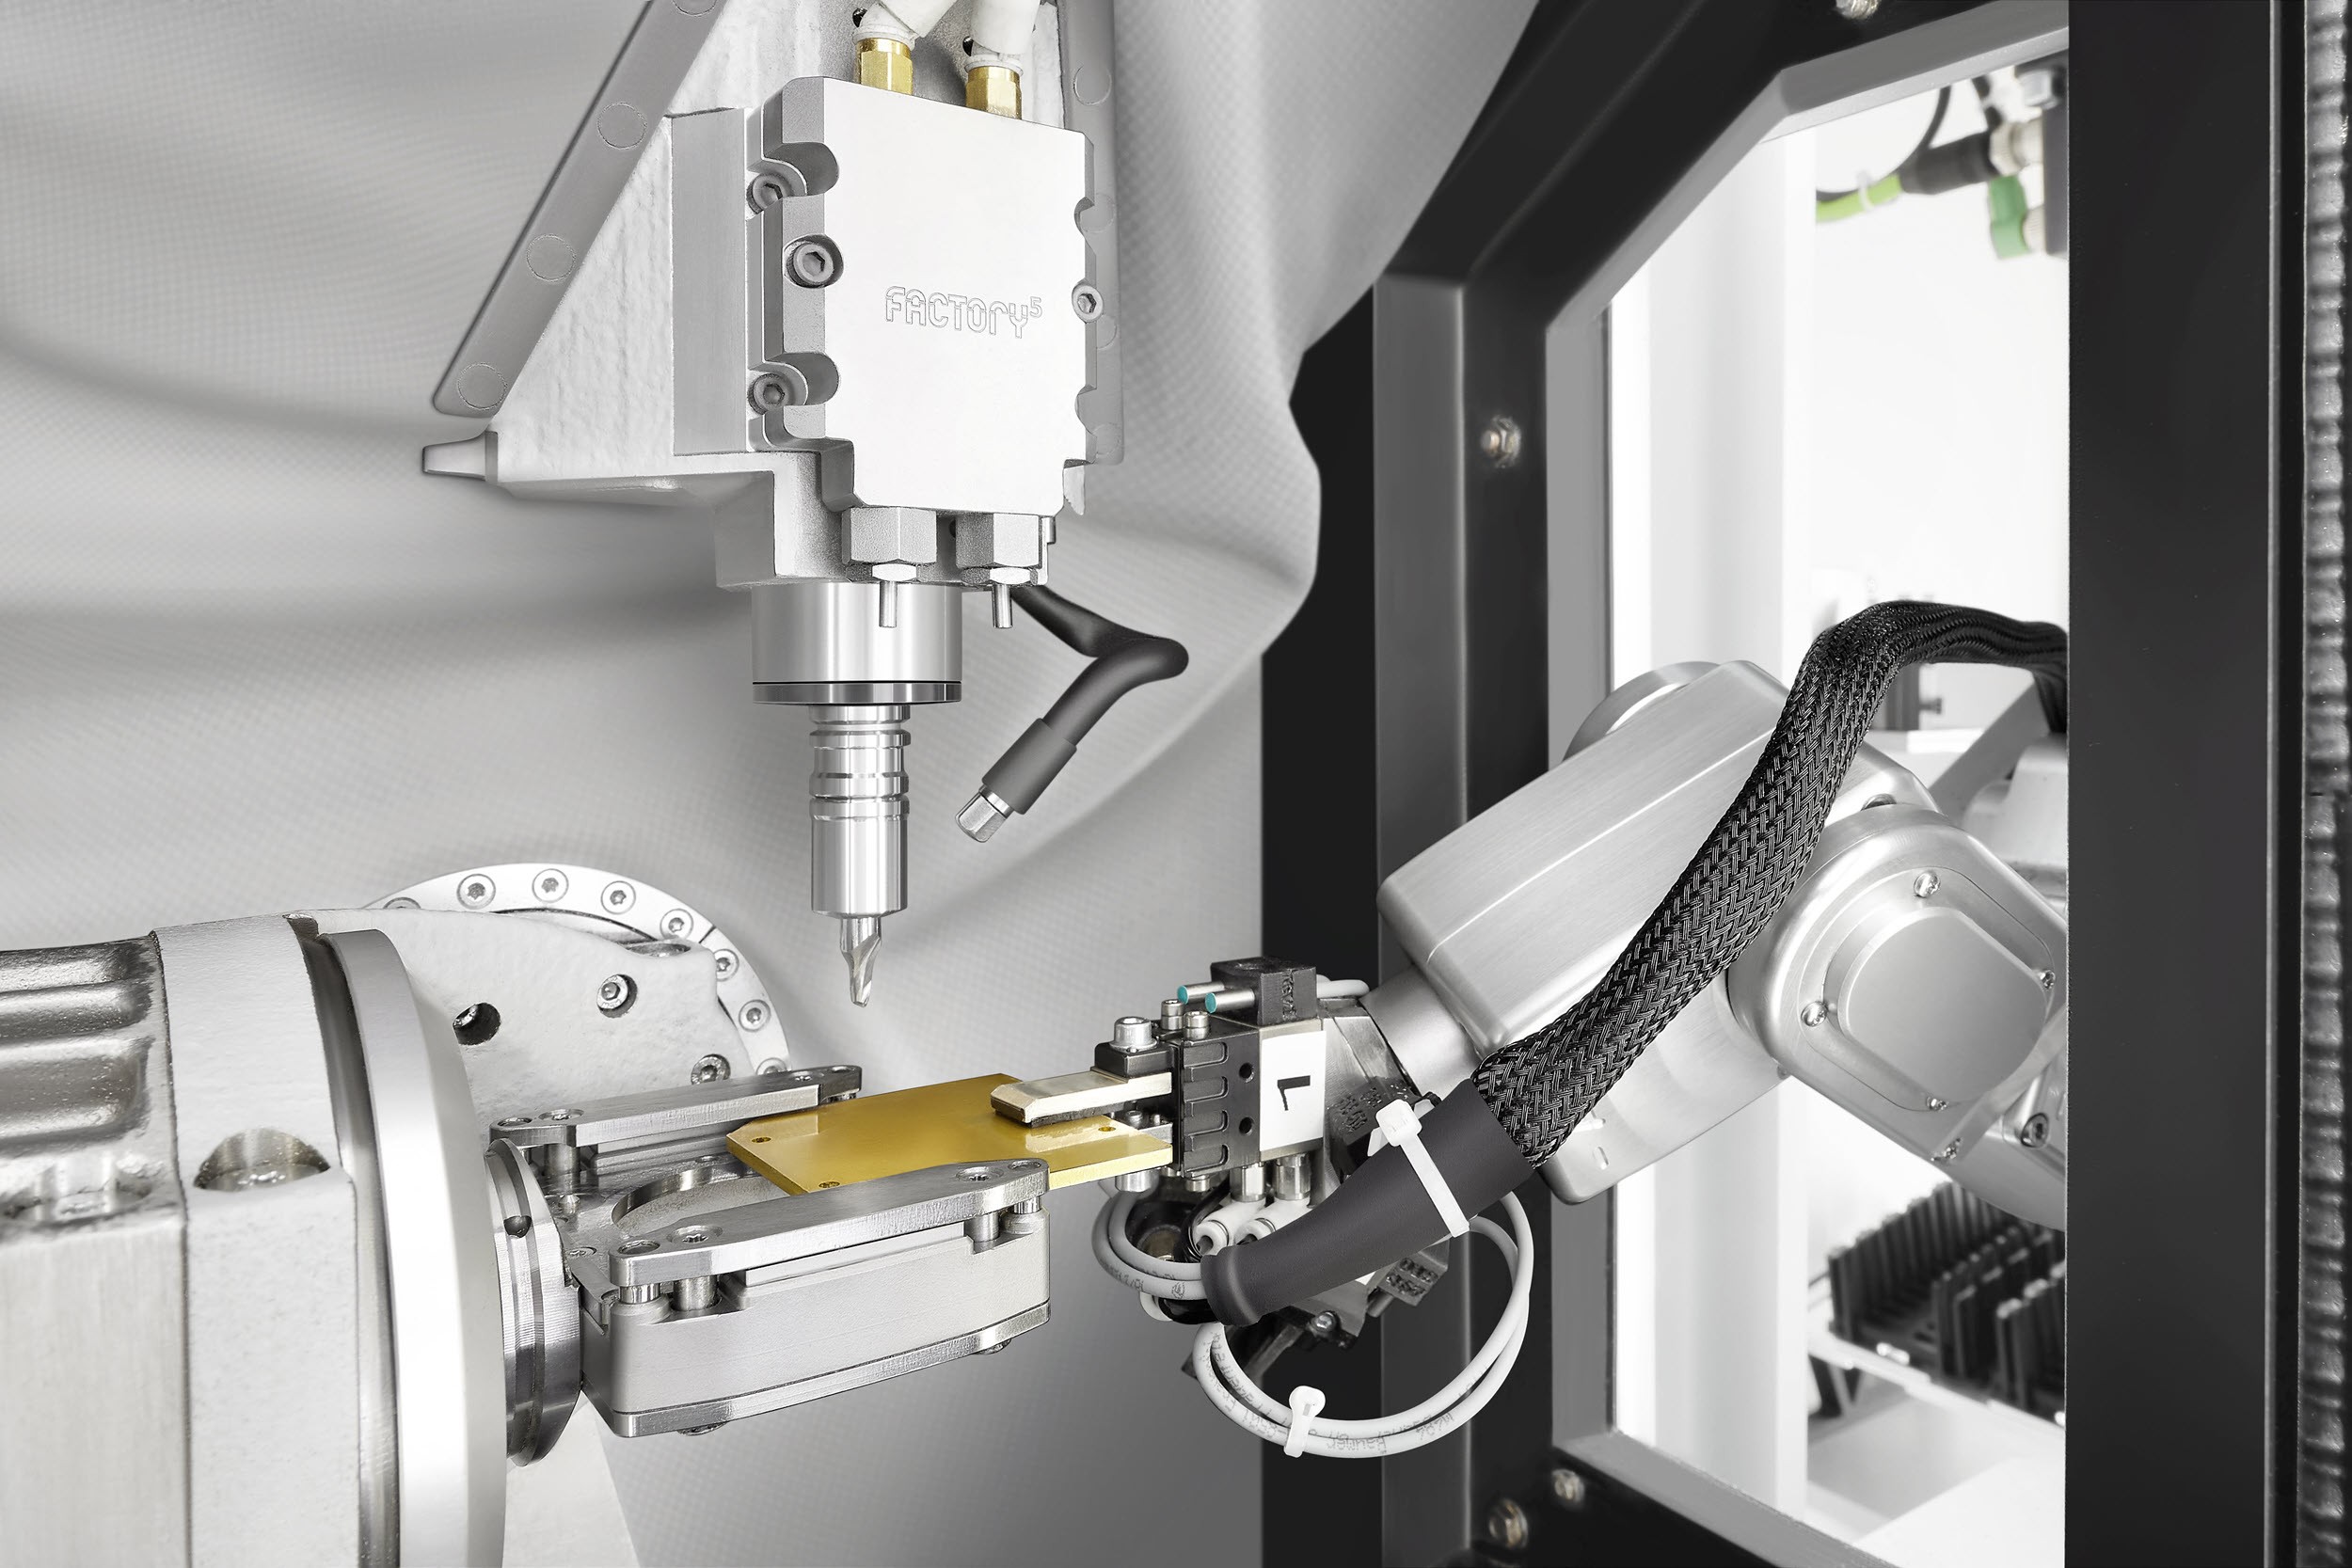 Plug-and-Play solution for automated micro machining: The Micro5, combined with the Feed5 handling system.